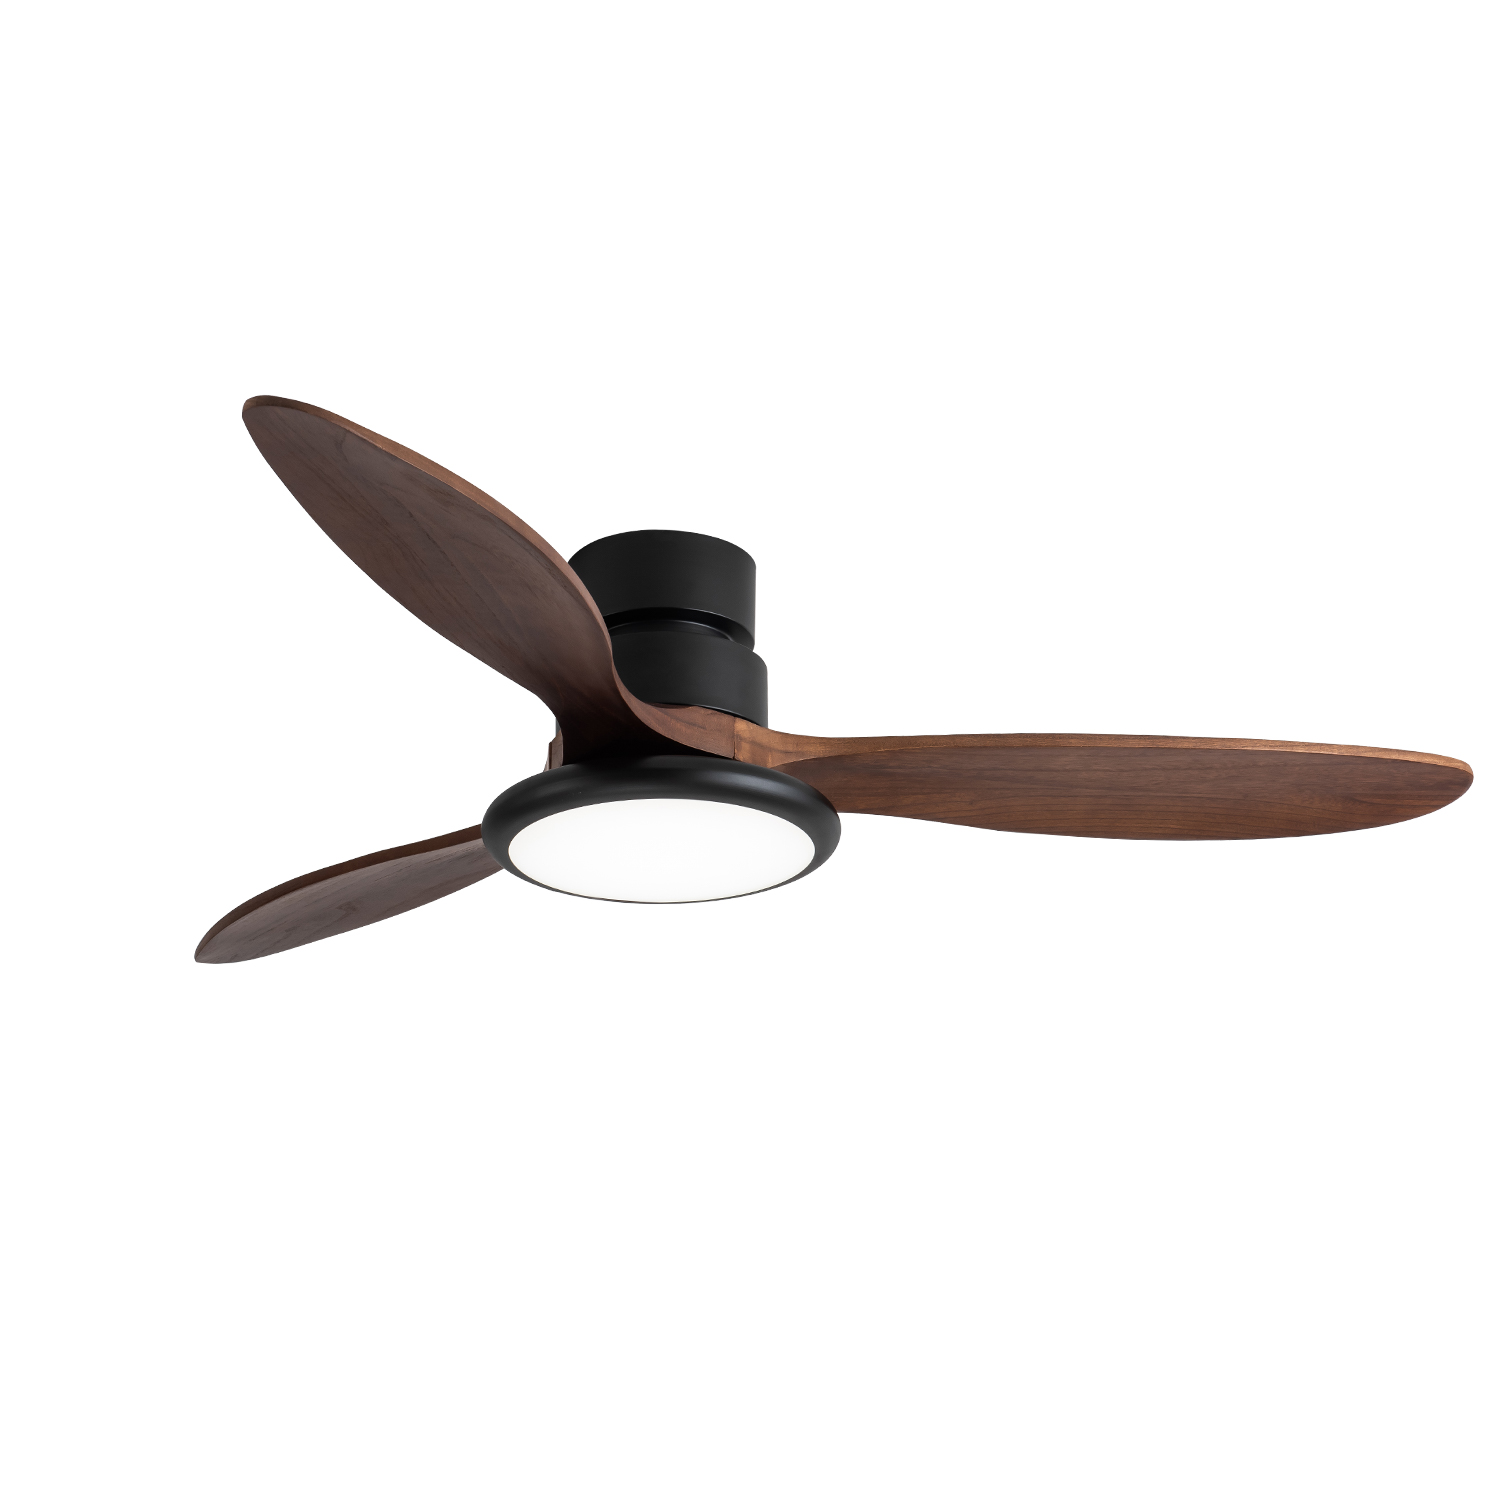 Modern Simple Decorative Wooden Fan Cele Remote Control Dc Bldc 3 Blade Cheap Price Inverter Ceiling Fan for Living Room